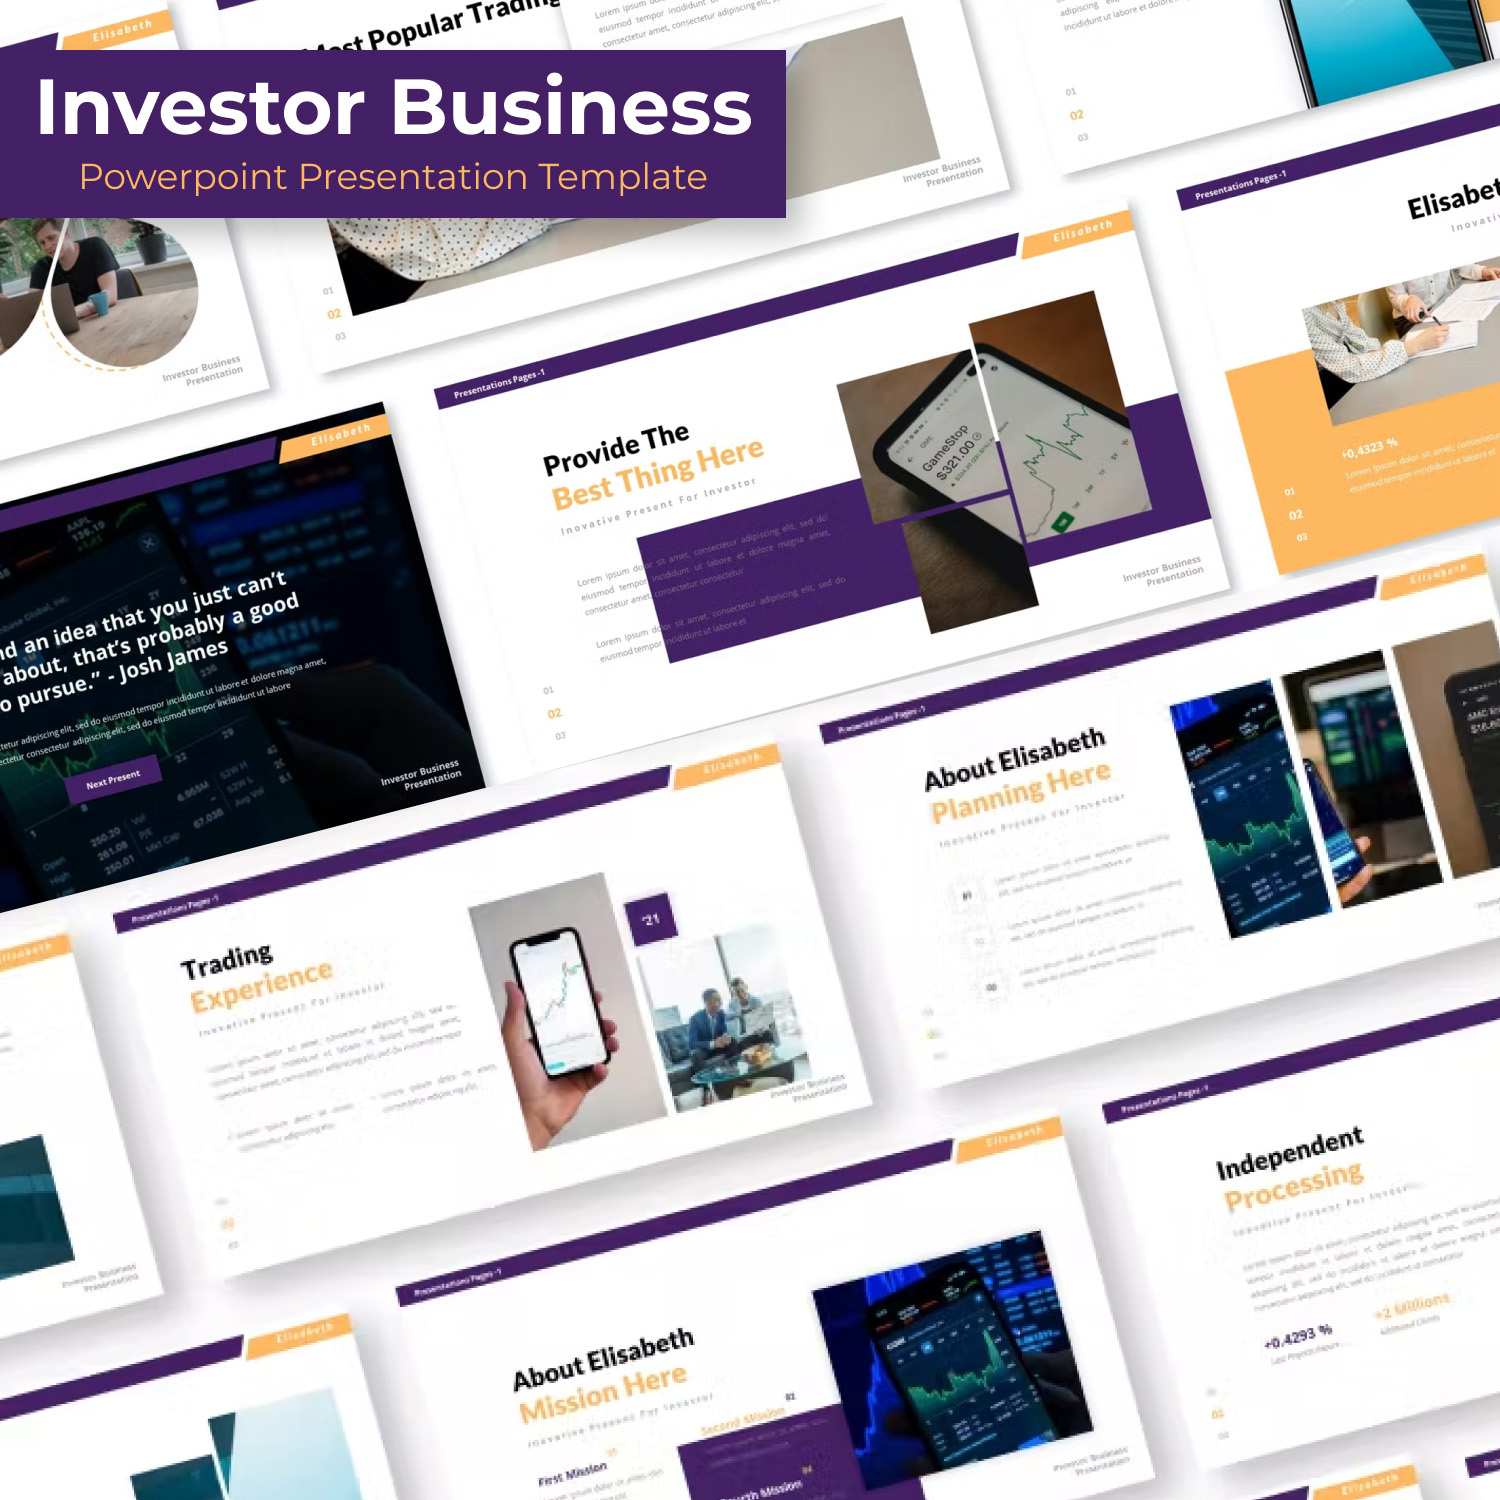 Prints of investor business powerpoint presentation template.